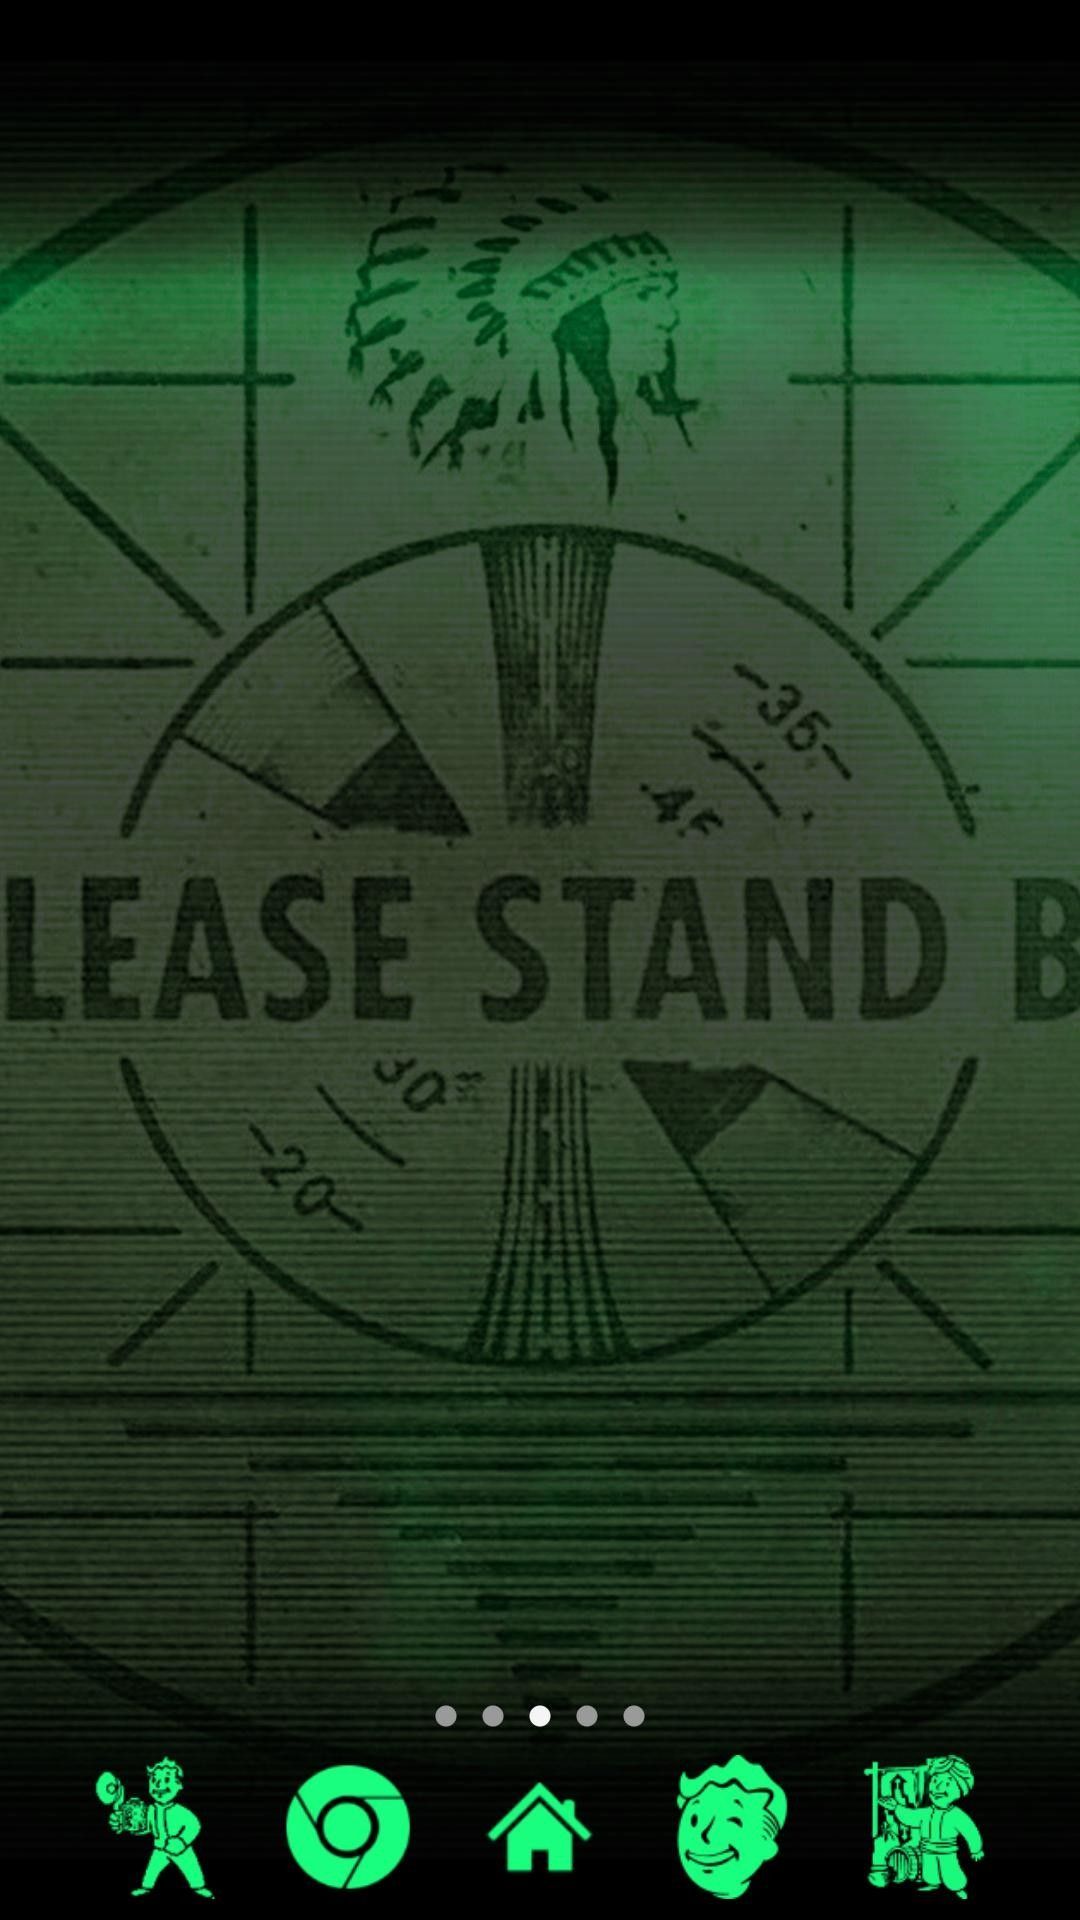 fallout 3 crashes on please stand by